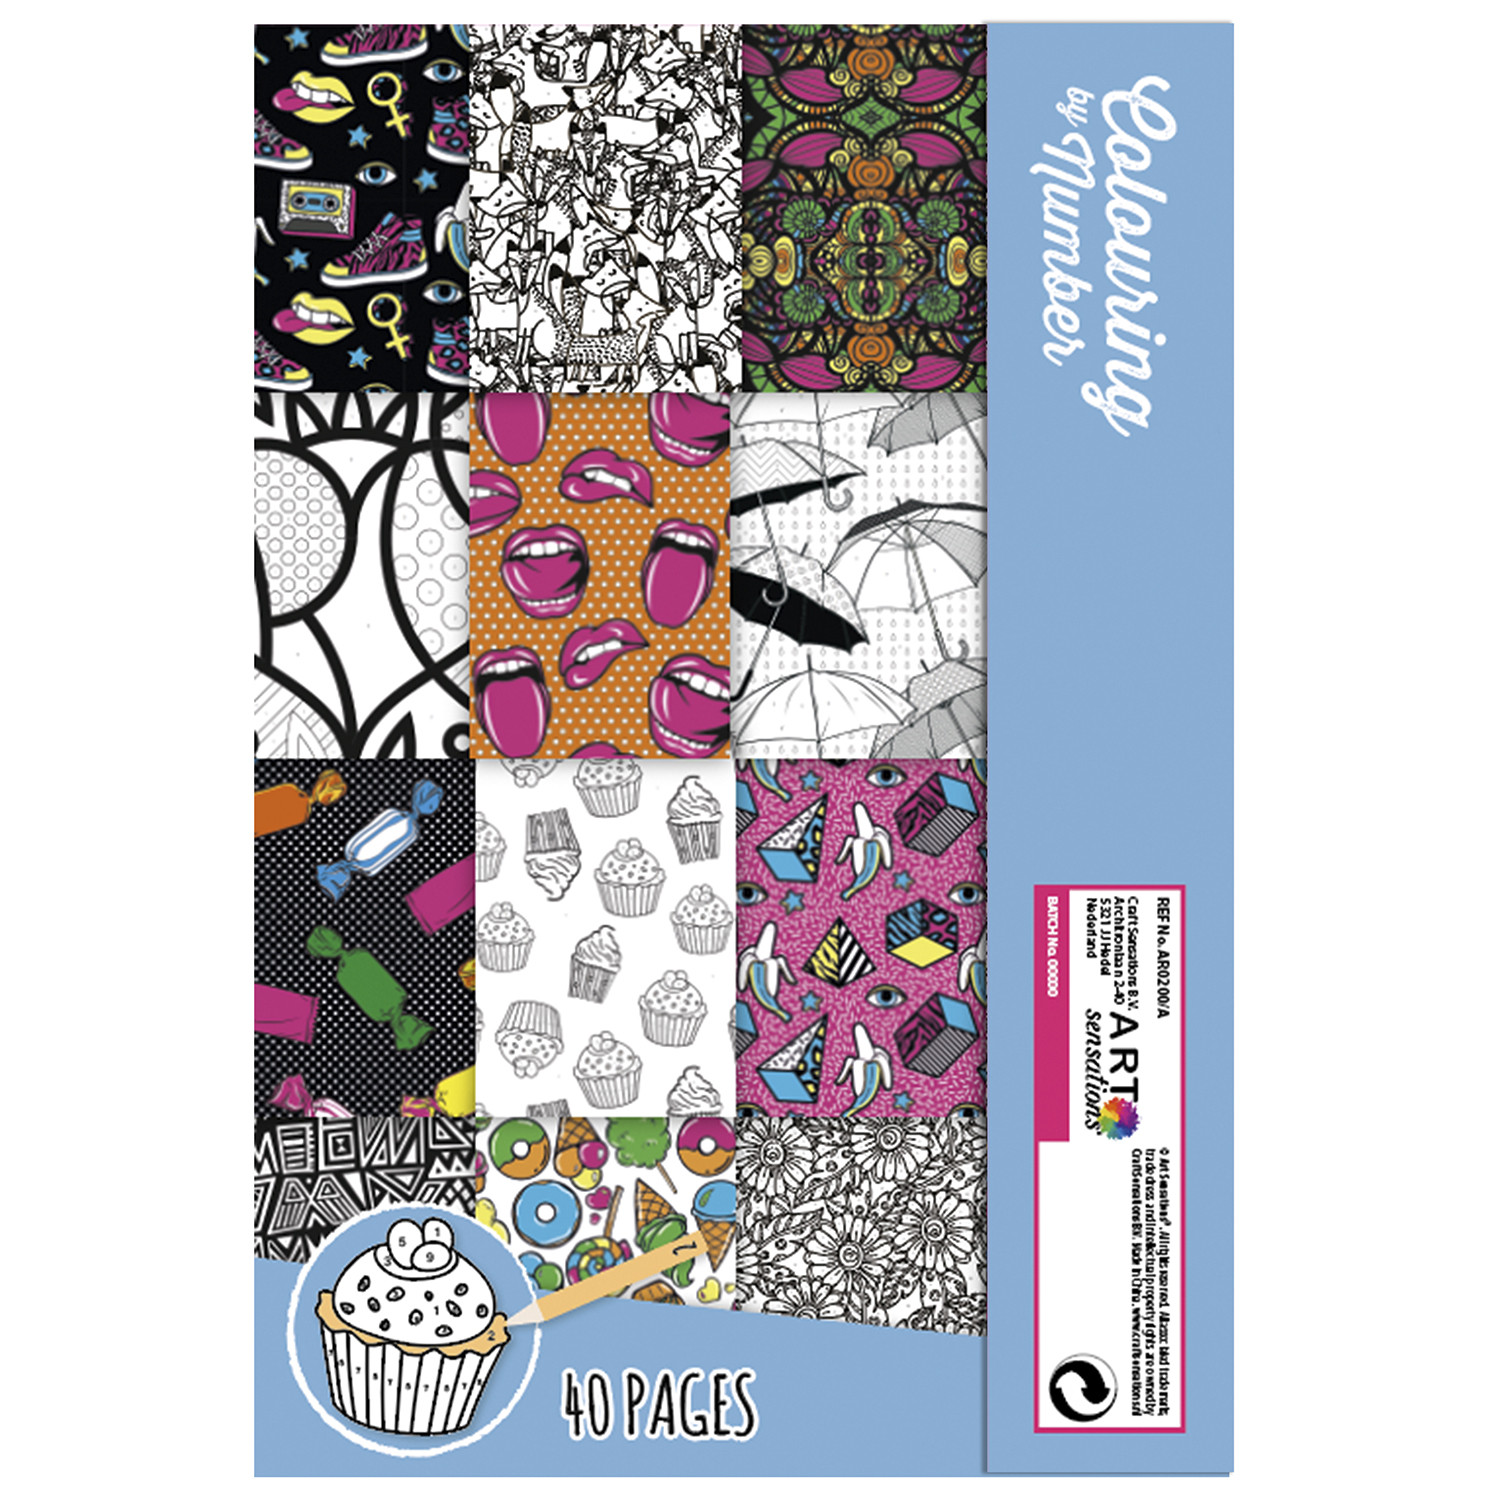 Single CRAFT Sensations Colouring By Number Book in Assorted styles Image 3